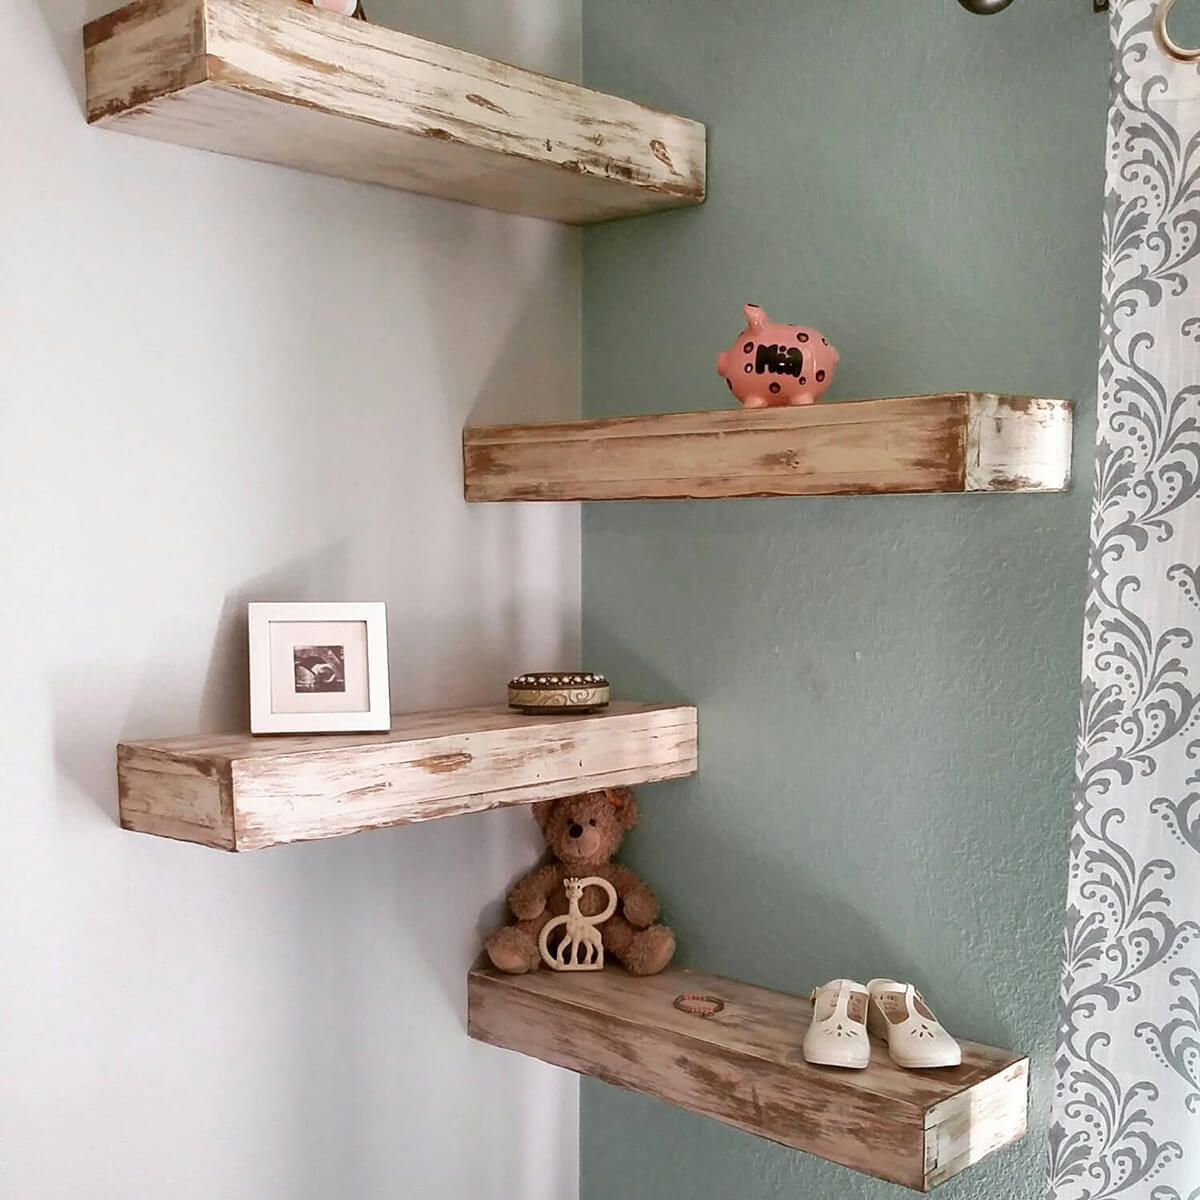 30 Outstanding Corner Shelves Ideas For Your House Corners